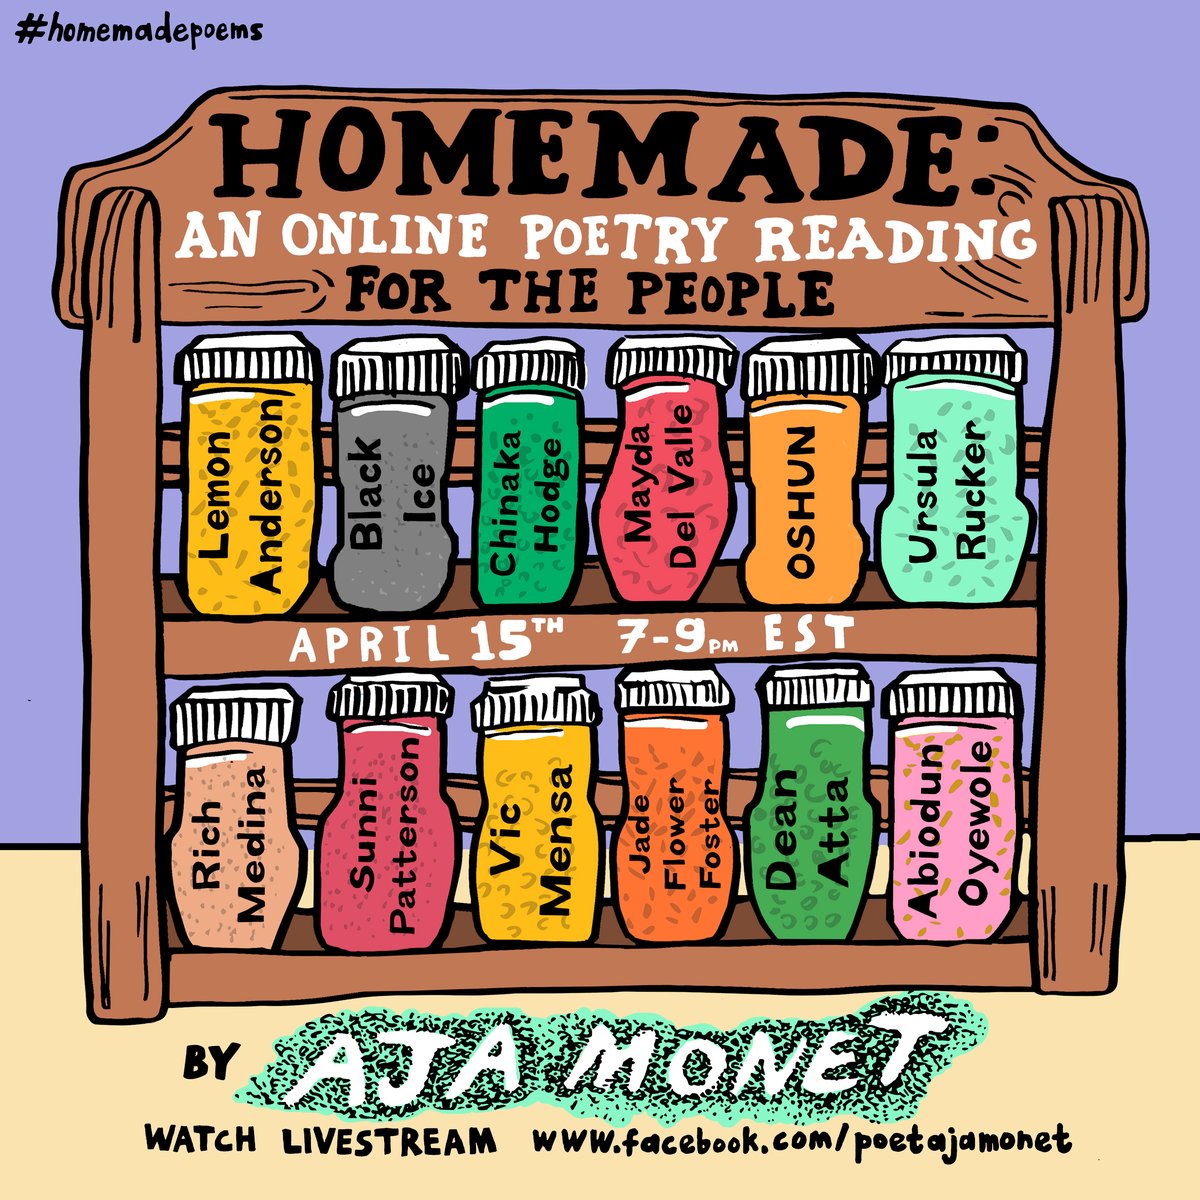 This week we have an incredible Homemade poetry reading feat @VicMensa @oshuniverse @richmedina @urucker @mayda1 @LemonAndersen AND a special feature by our comrade @KMPyouthjustice aka King Moosa who was released from prison last week and will be reading poetry as a FREE MAN!